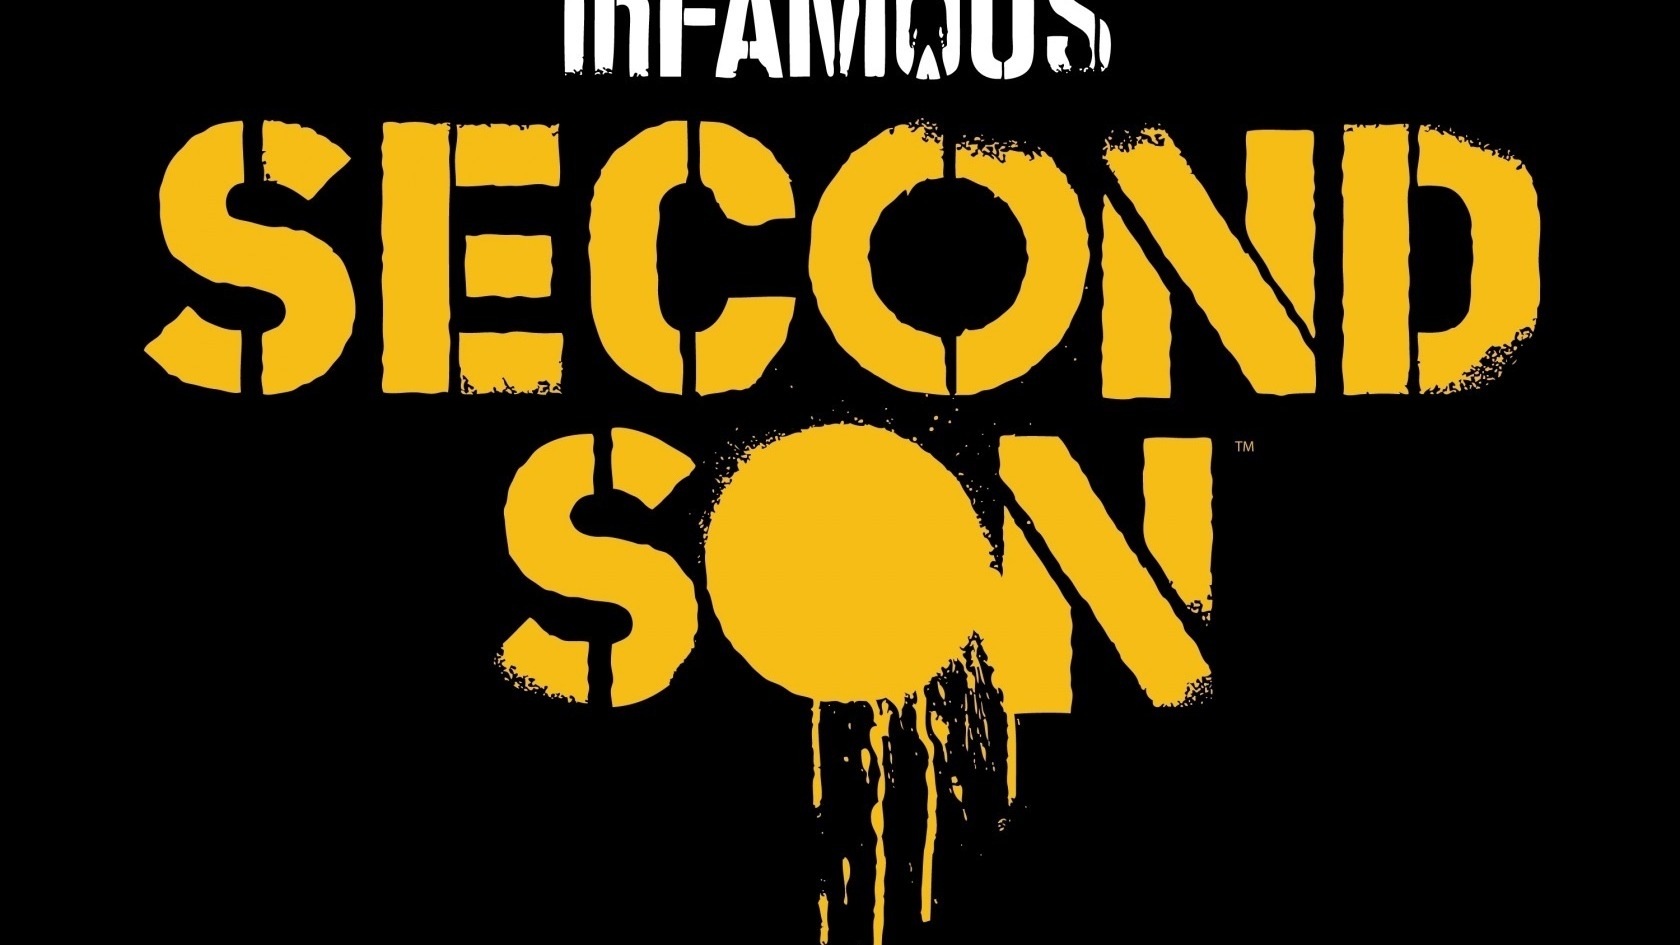 inFamous Second Son for 1680 x 945 HDTV resolution